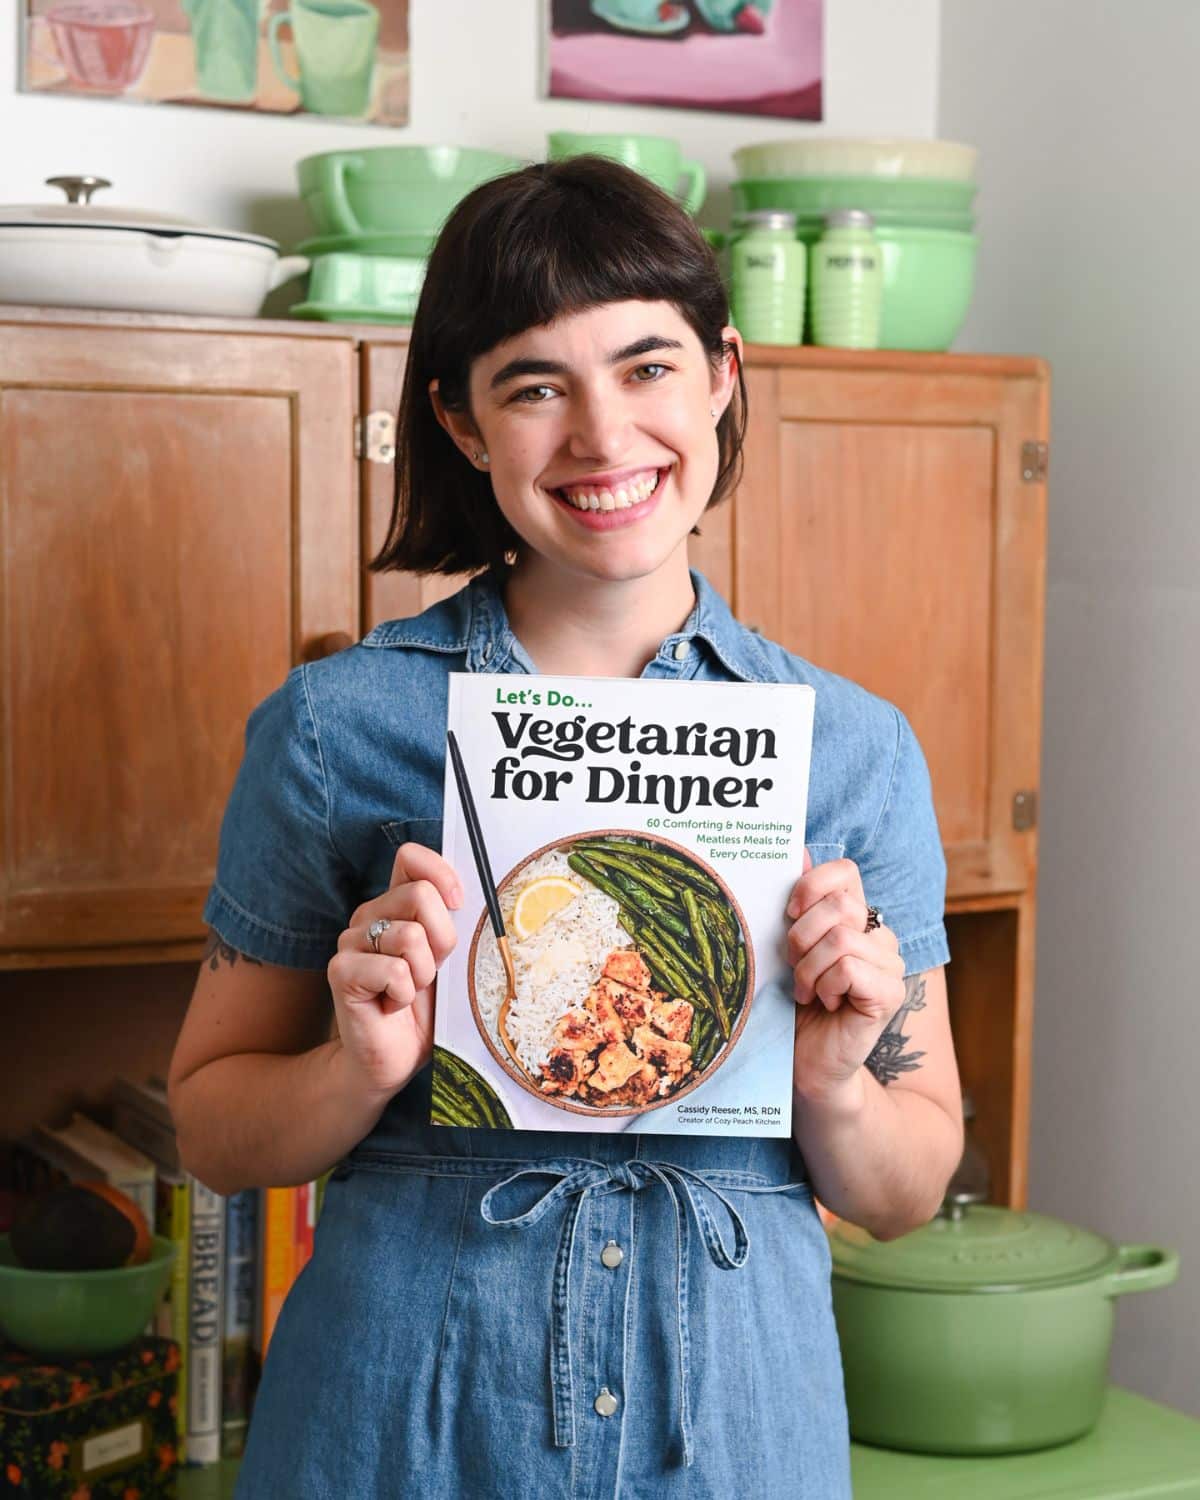 Woman with brown hair in a denim dress holding a cookbook and smiling.